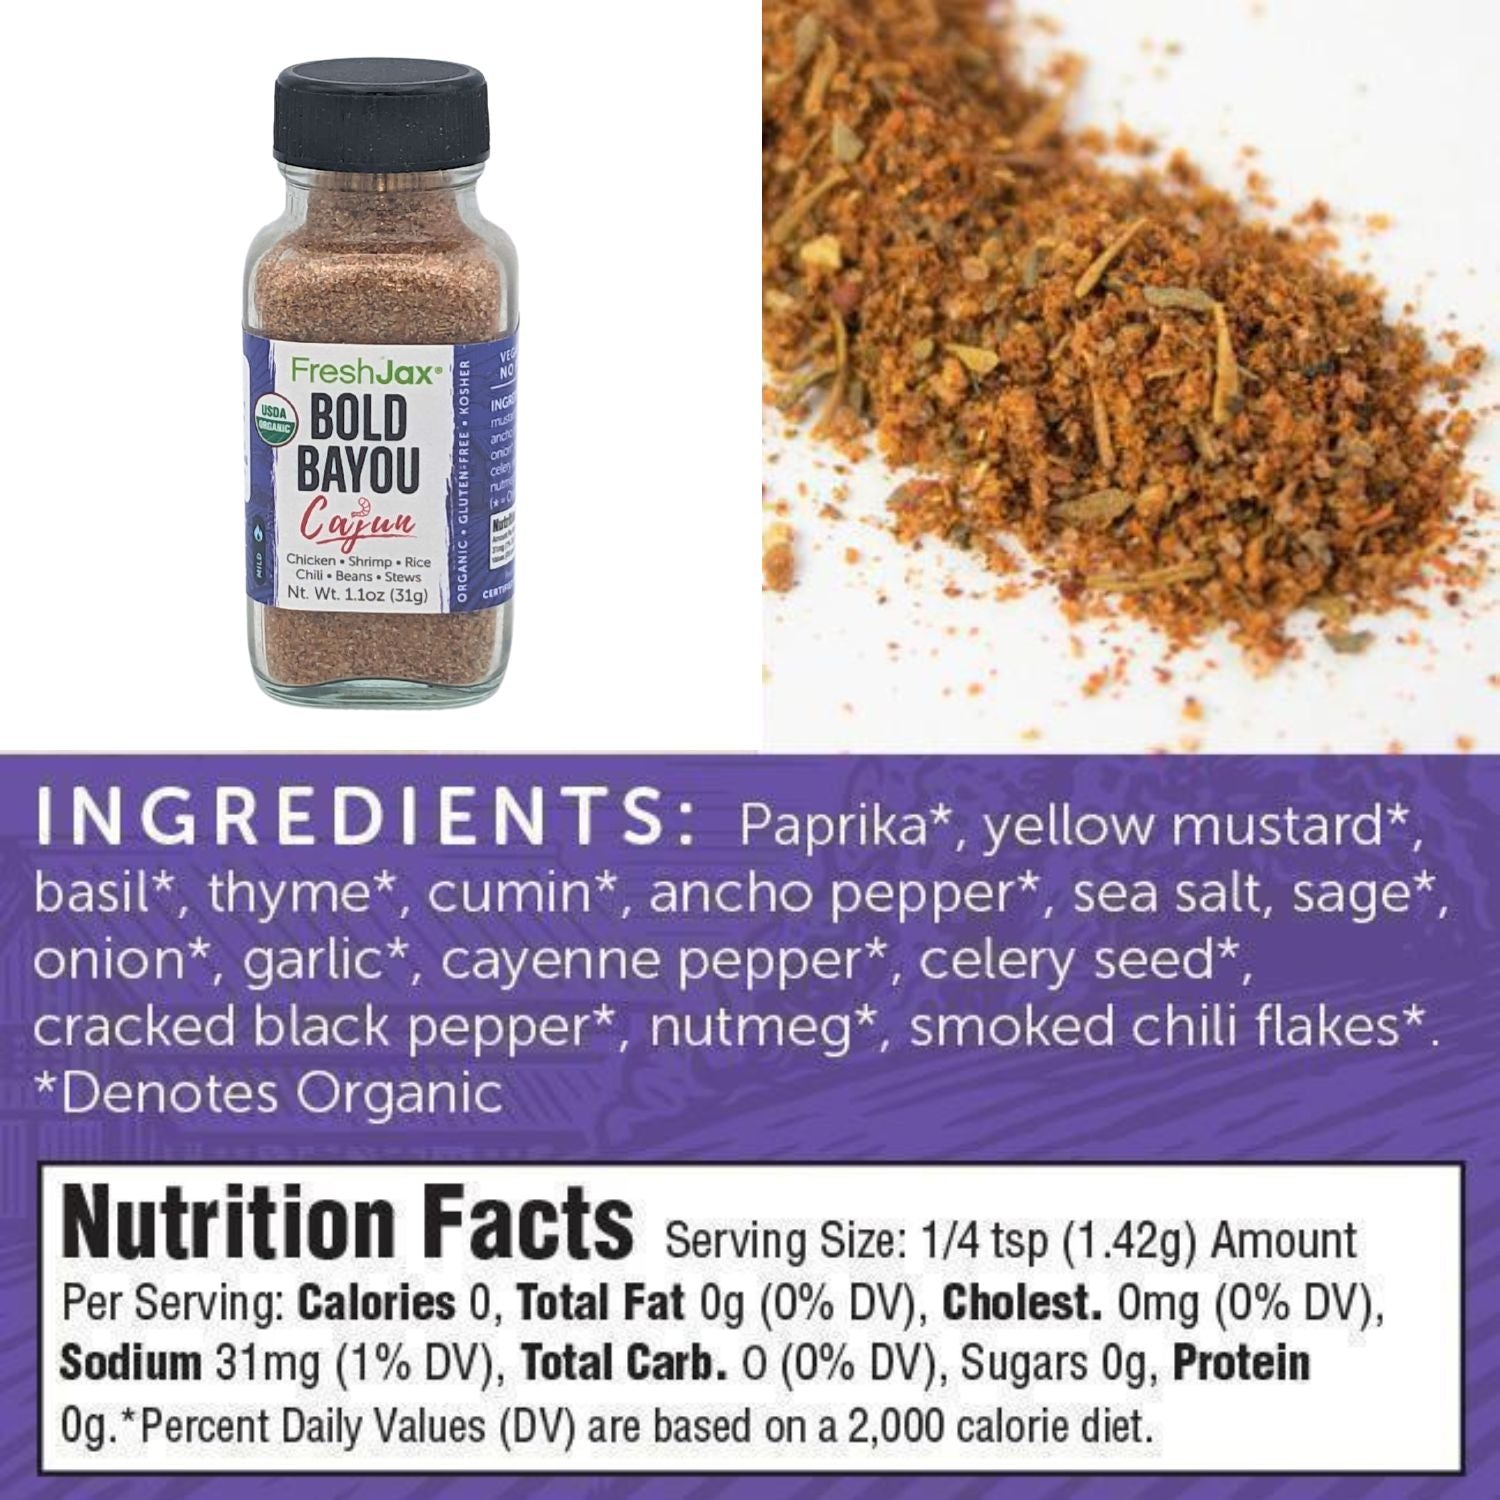 FreshJax Organic Spices Bold Bayou Seasoning Blend Ingredients and Nutritional Information